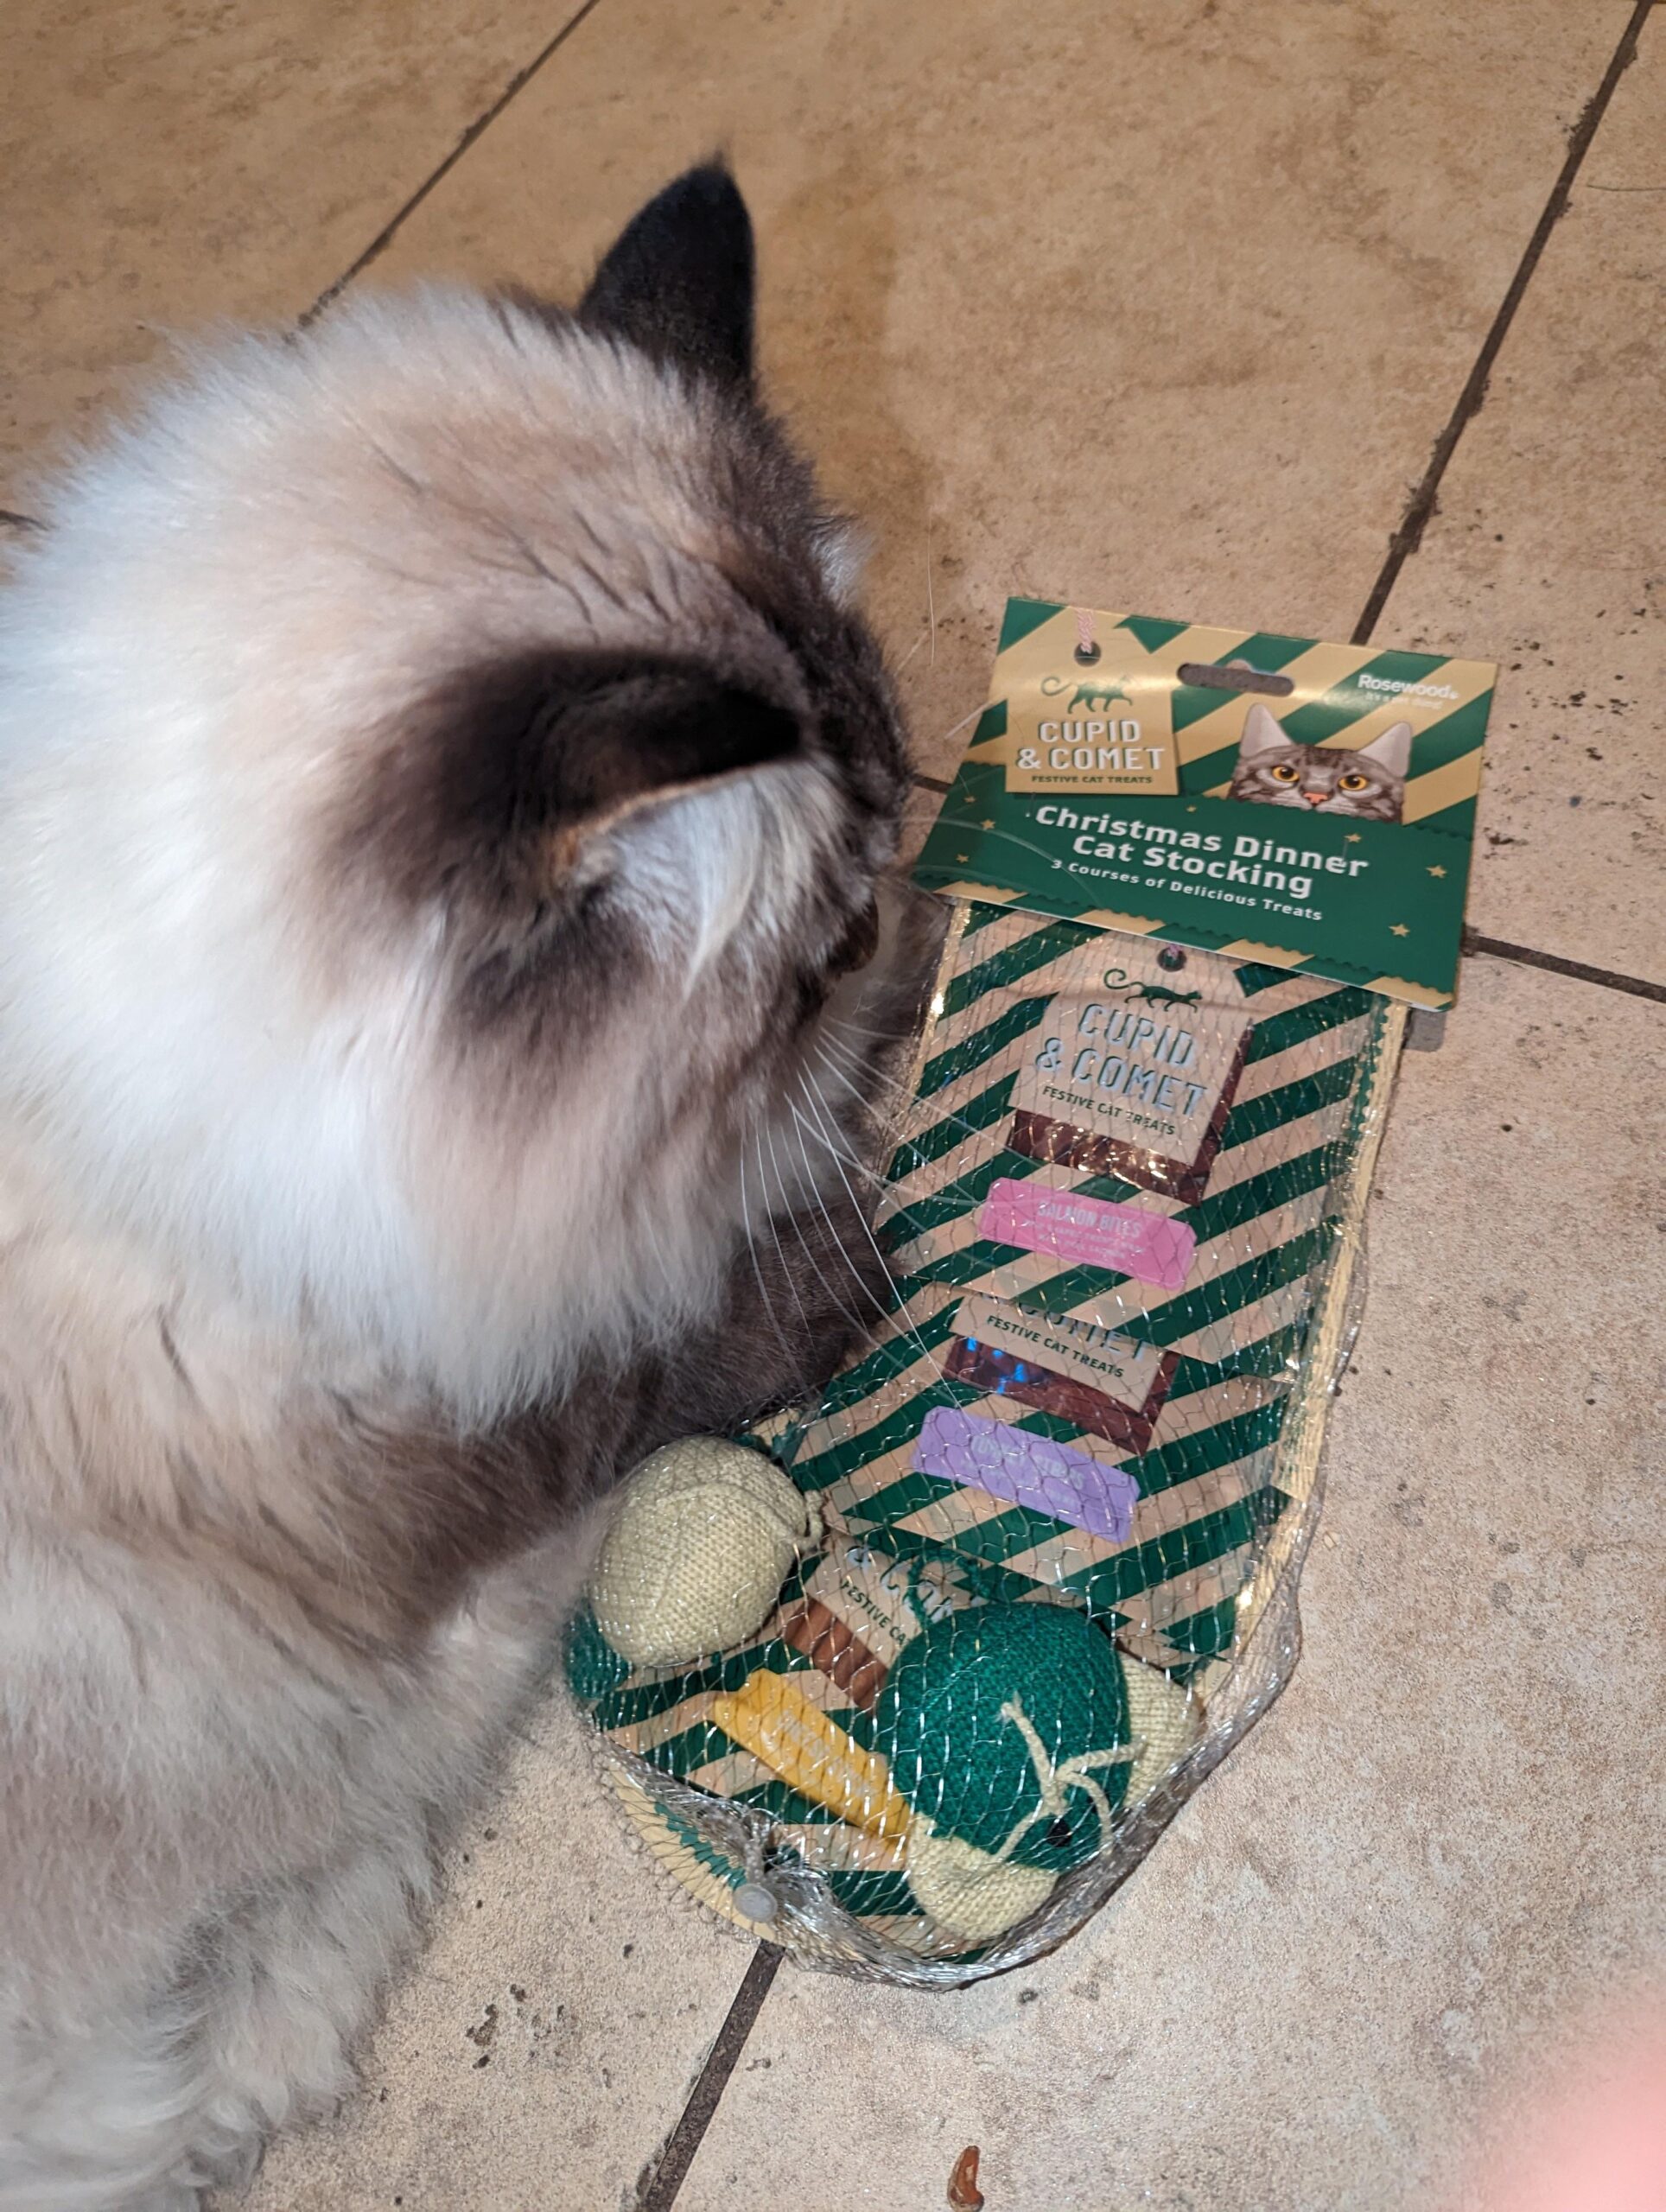 Secret Santa visited Max the cat as properly!